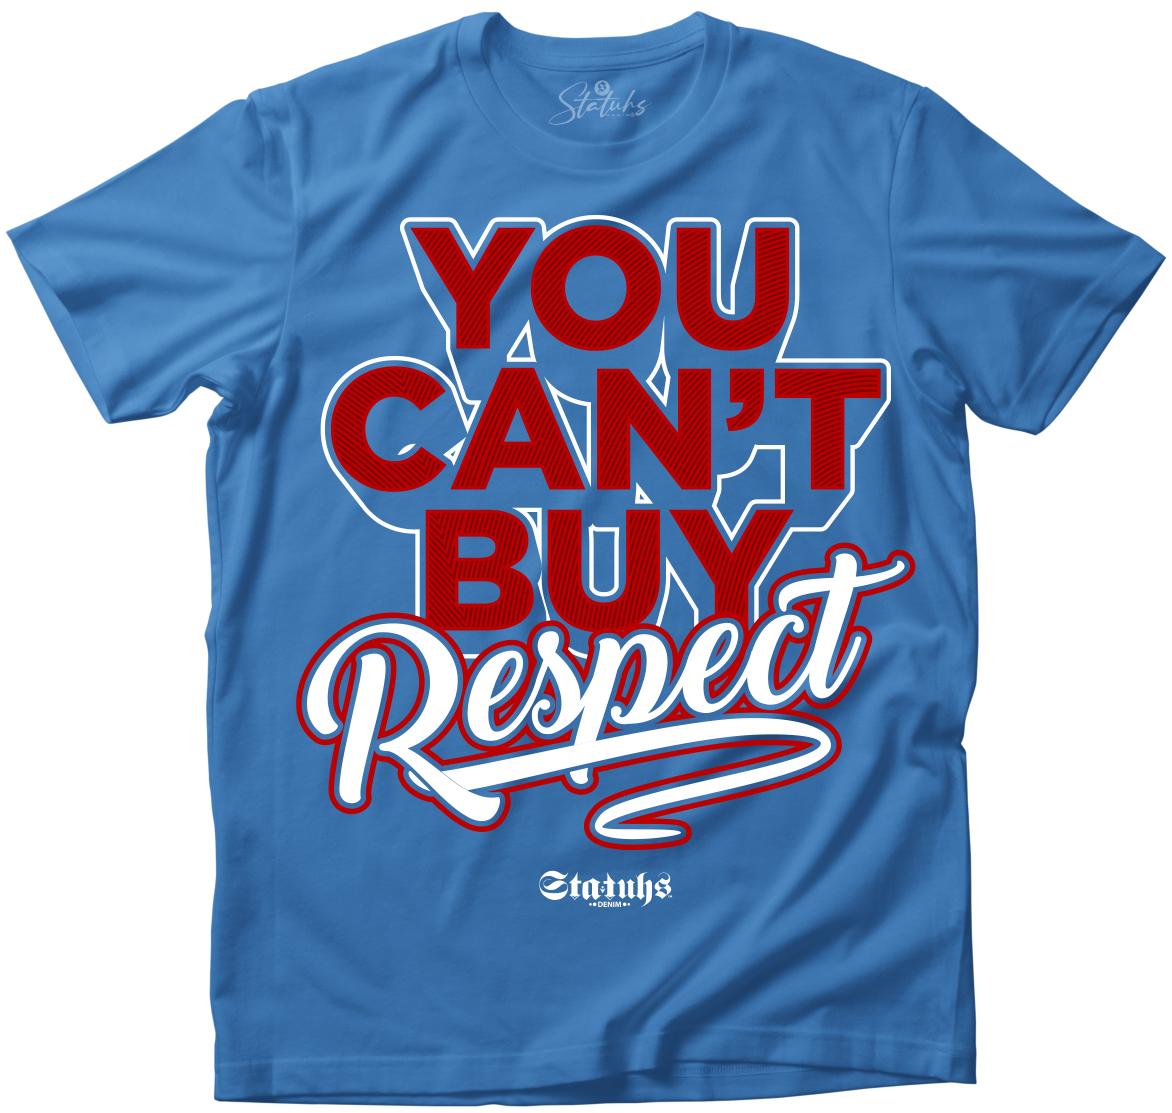 YOU CANT BUY RESPECT